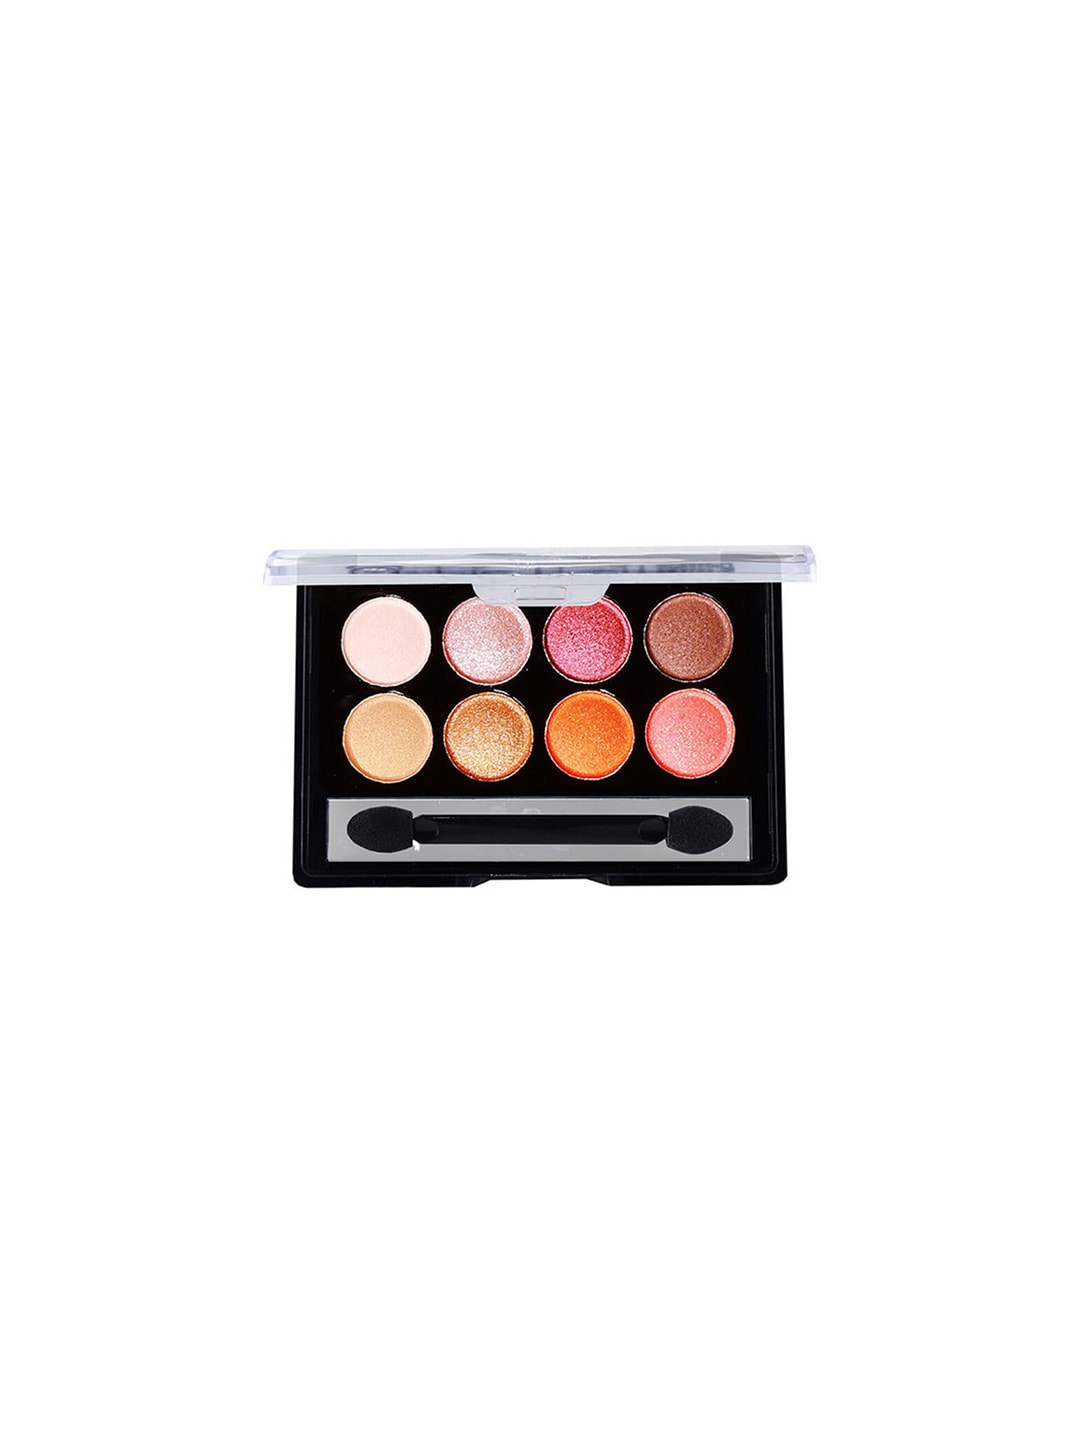 Sivanna Colors Make-Up Studio Glamorous Collection Eye Shadow Palette - HF553 01 Price in India